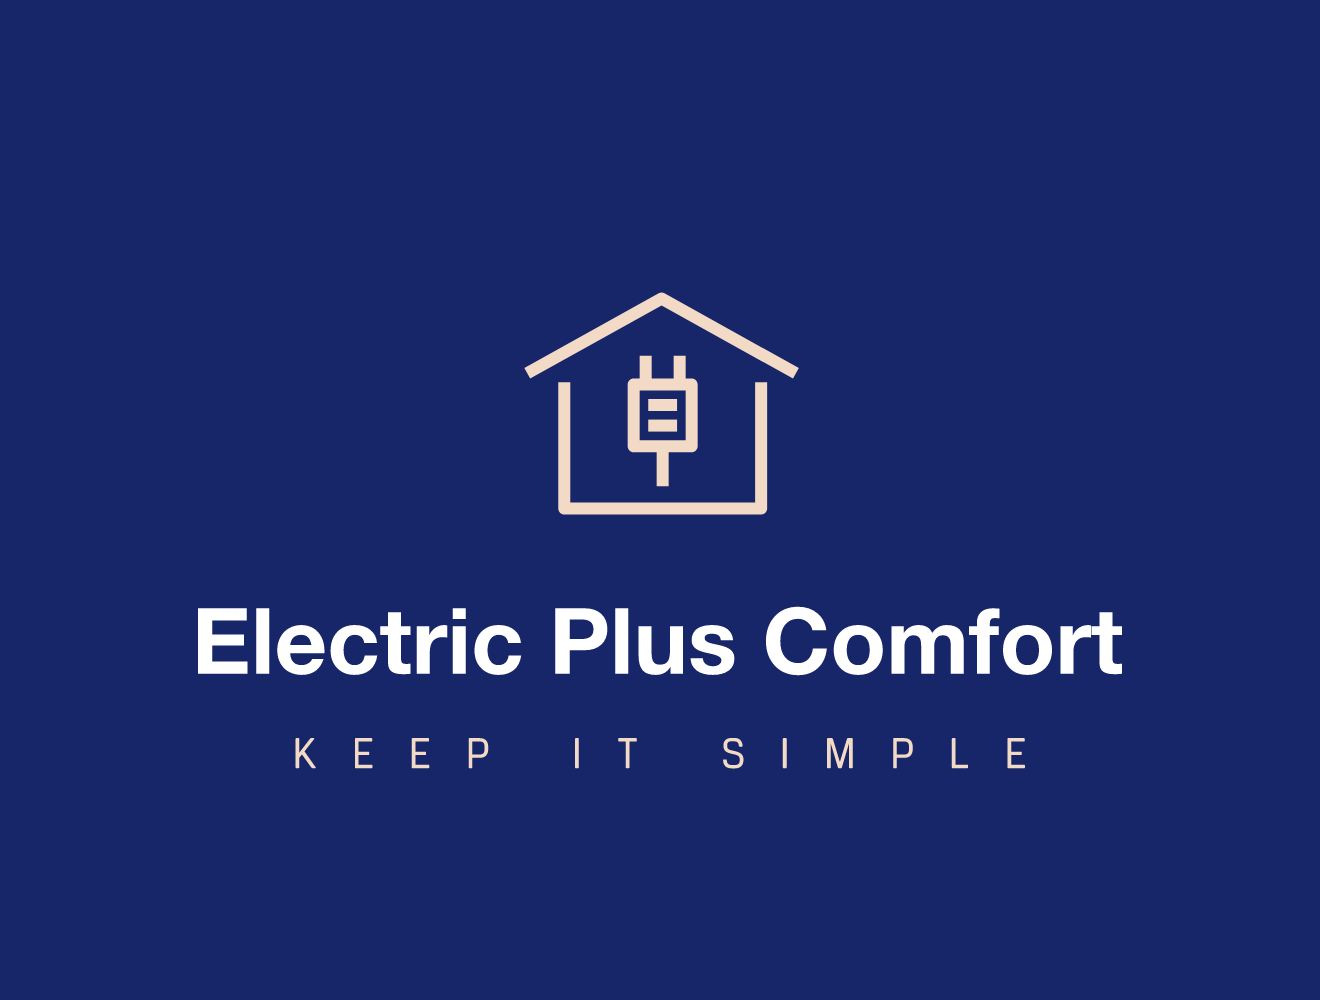 Air-conditioning & electrical Projects